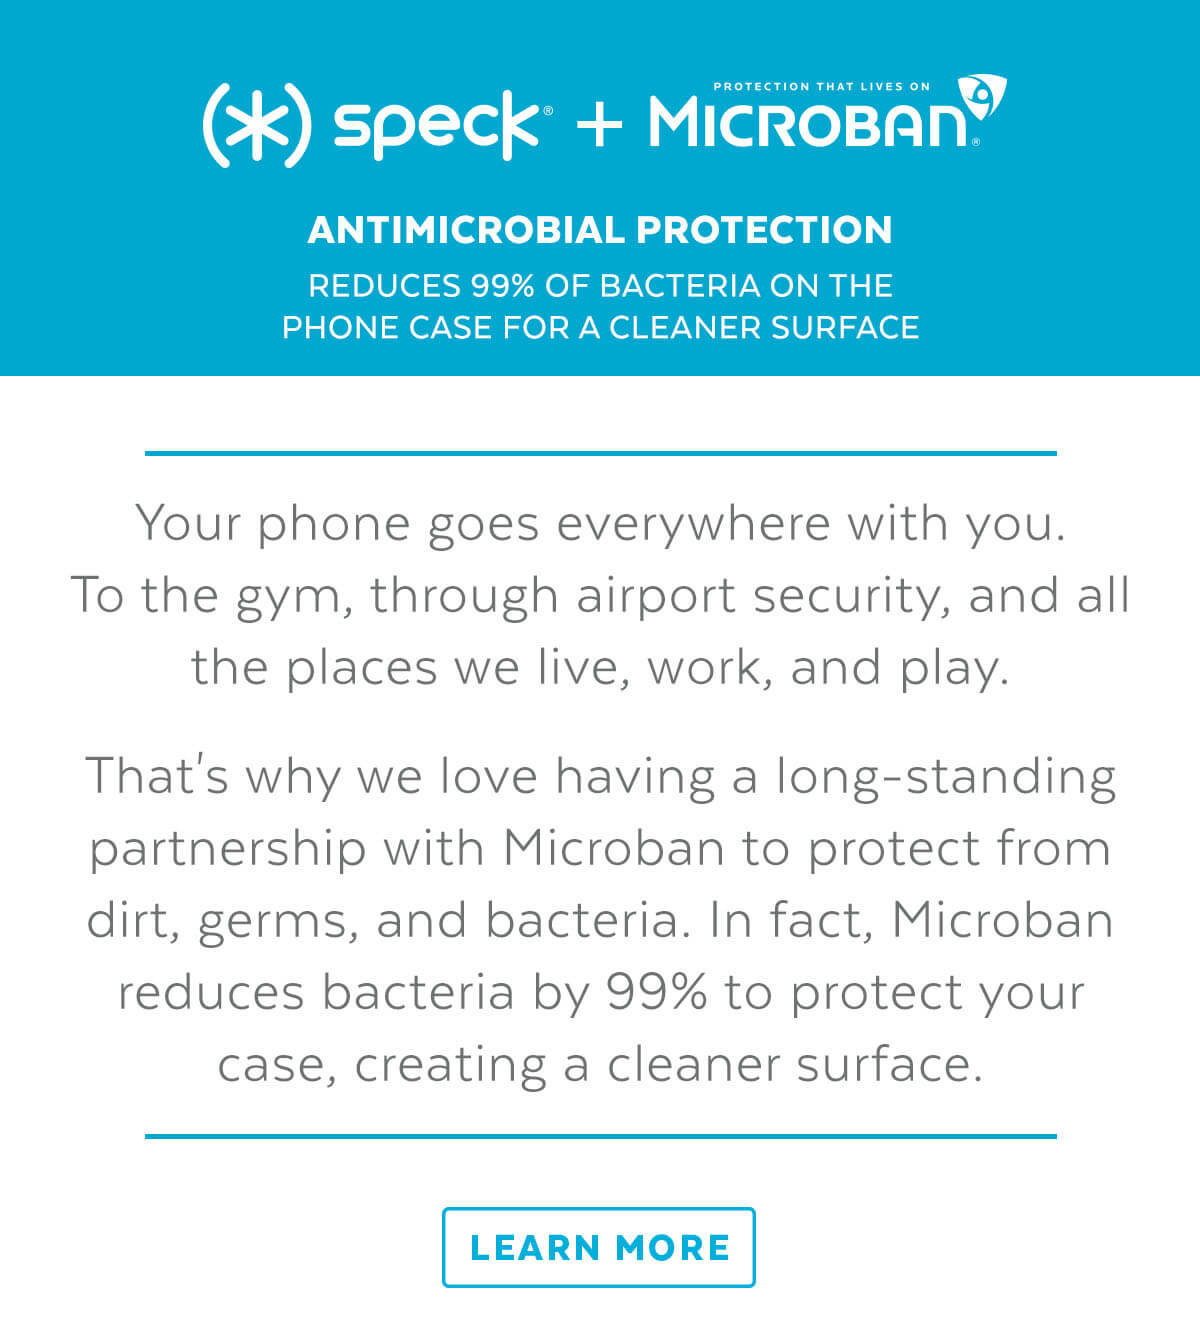 Speck + Microban: Antimicrobial protection. Reduces 99% of bacteria on the phone case for a cleaner surface. Your phone goes everywhere with you. To the gym, through airport security, and all the places we live, work, and play. That''s why we love having a long-standing partnership with Microban to protect from dirt, germs, and bacteria. In fact, Microban reduces bacteria by 99% to protect your case, creating a cleaner surface. Learn More.